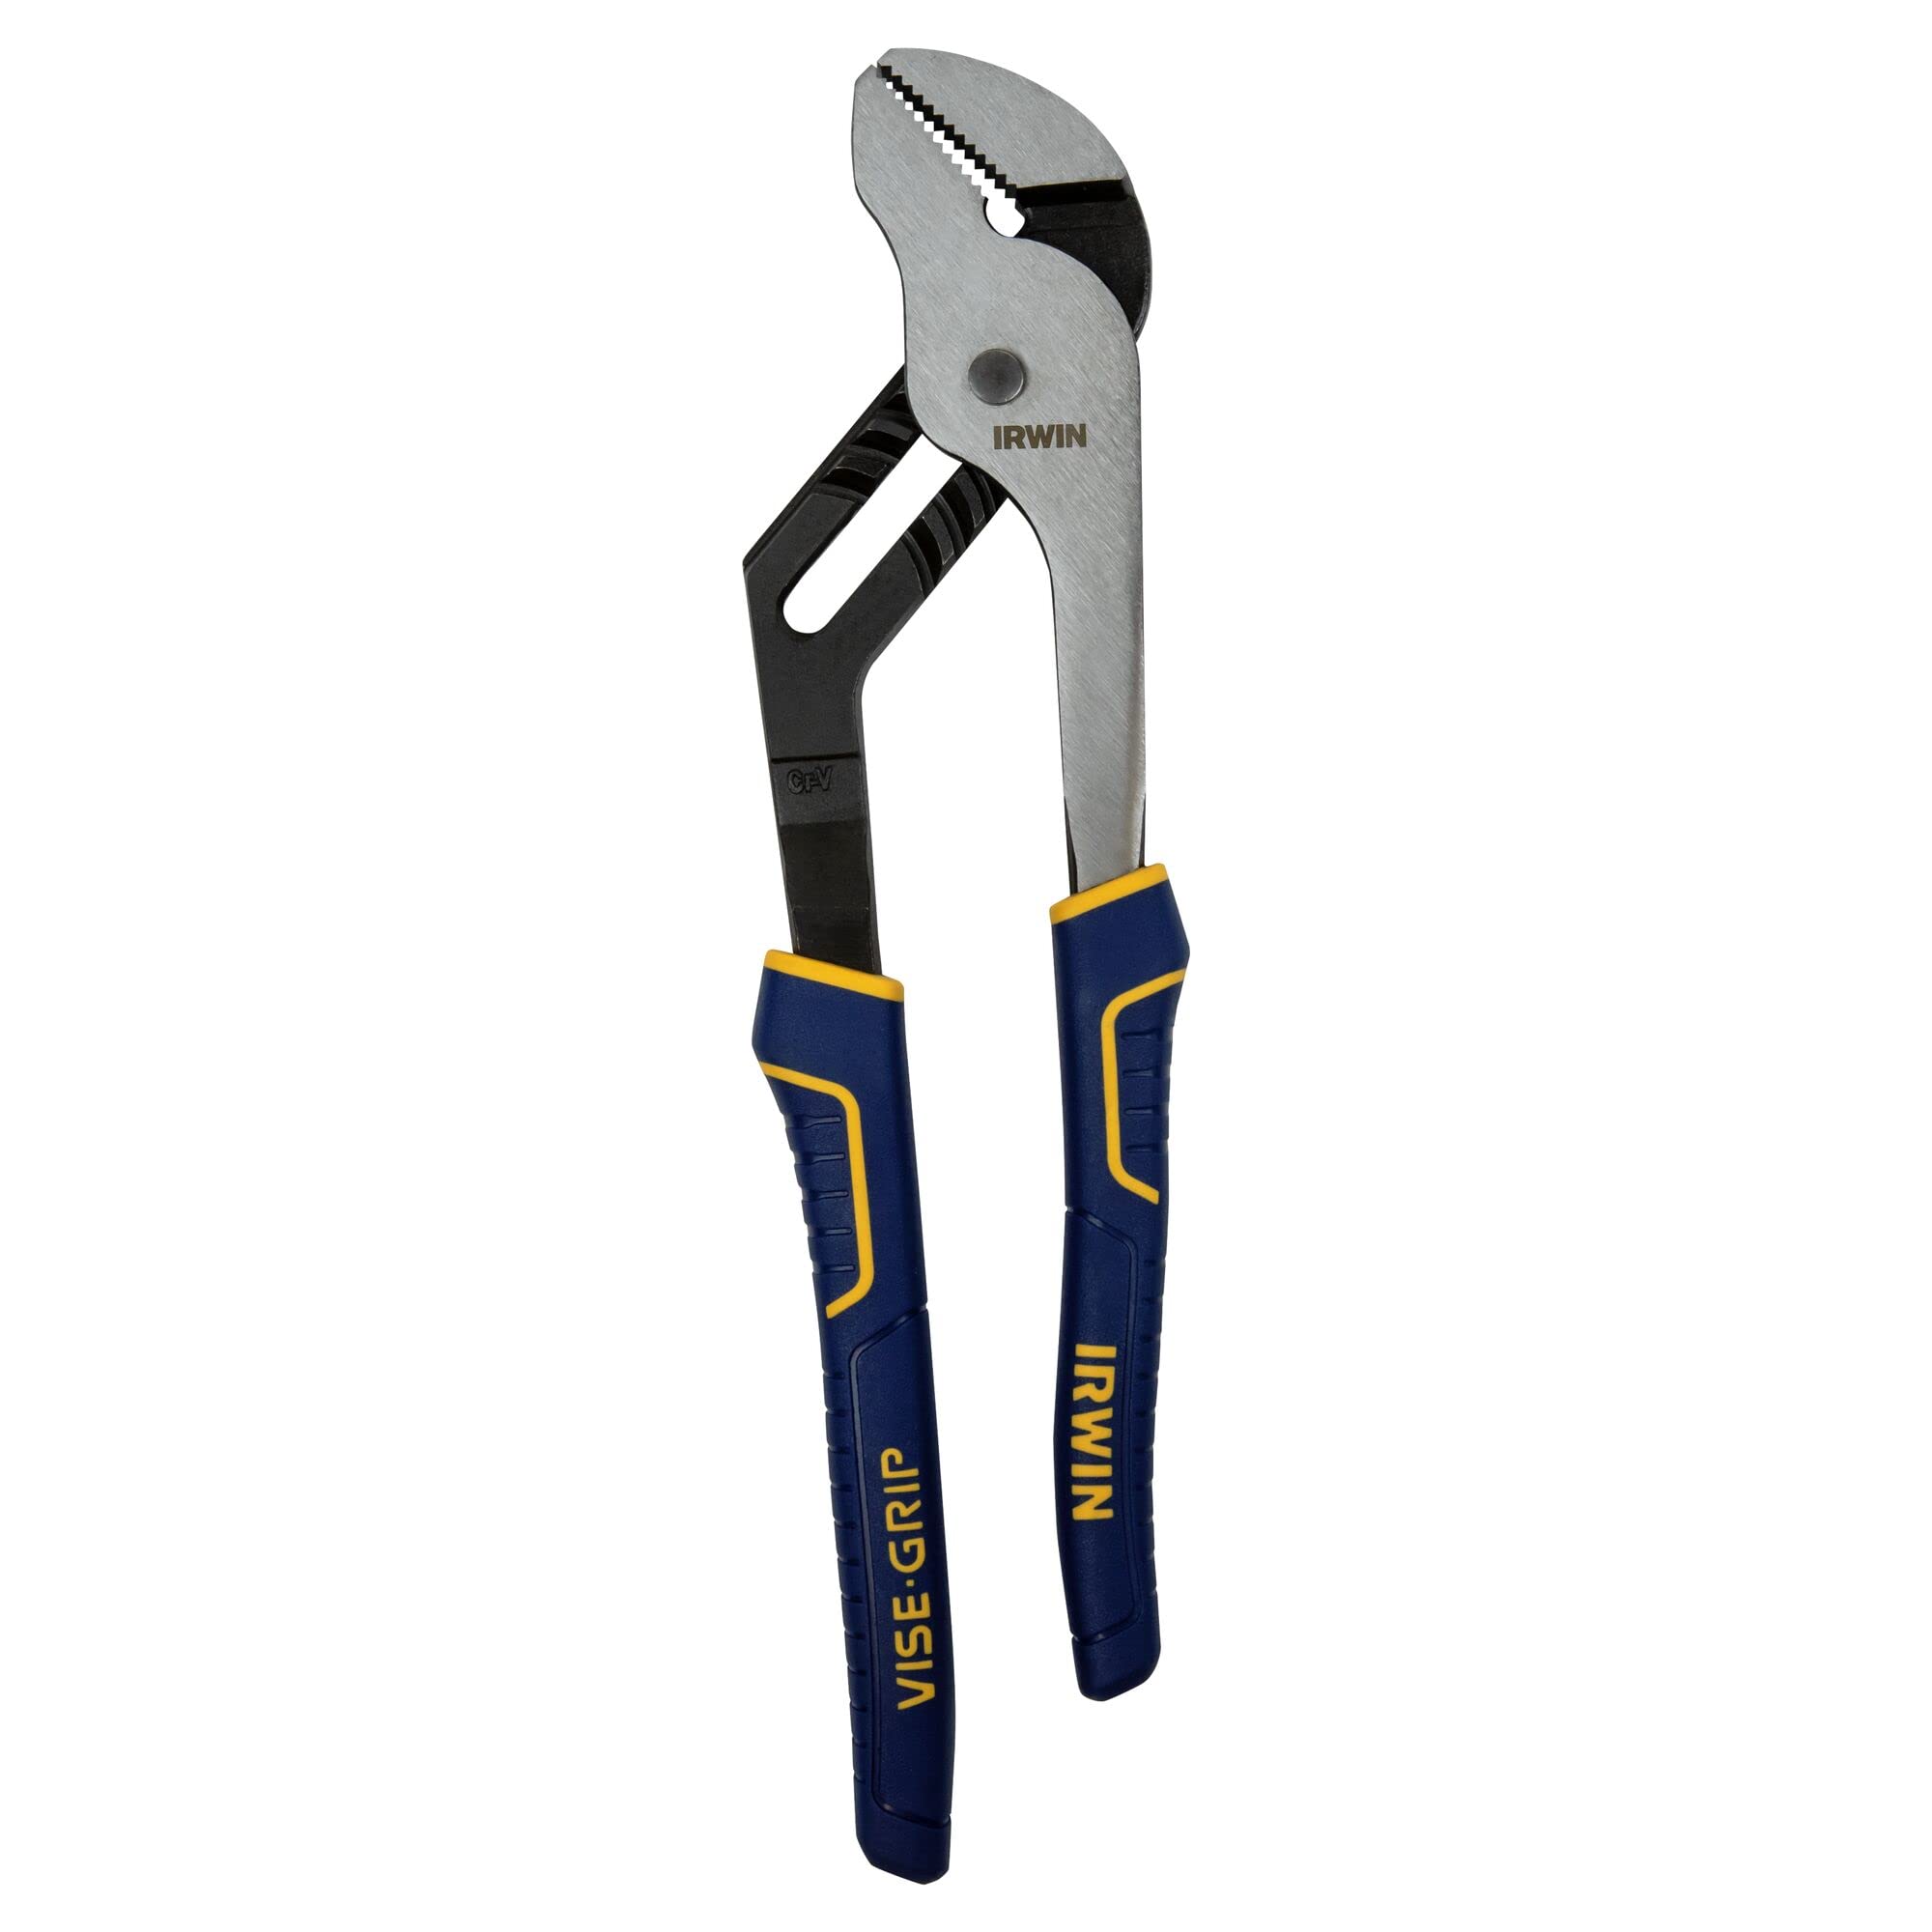 IRWIN GROOVE JOINT PLIERS 12"